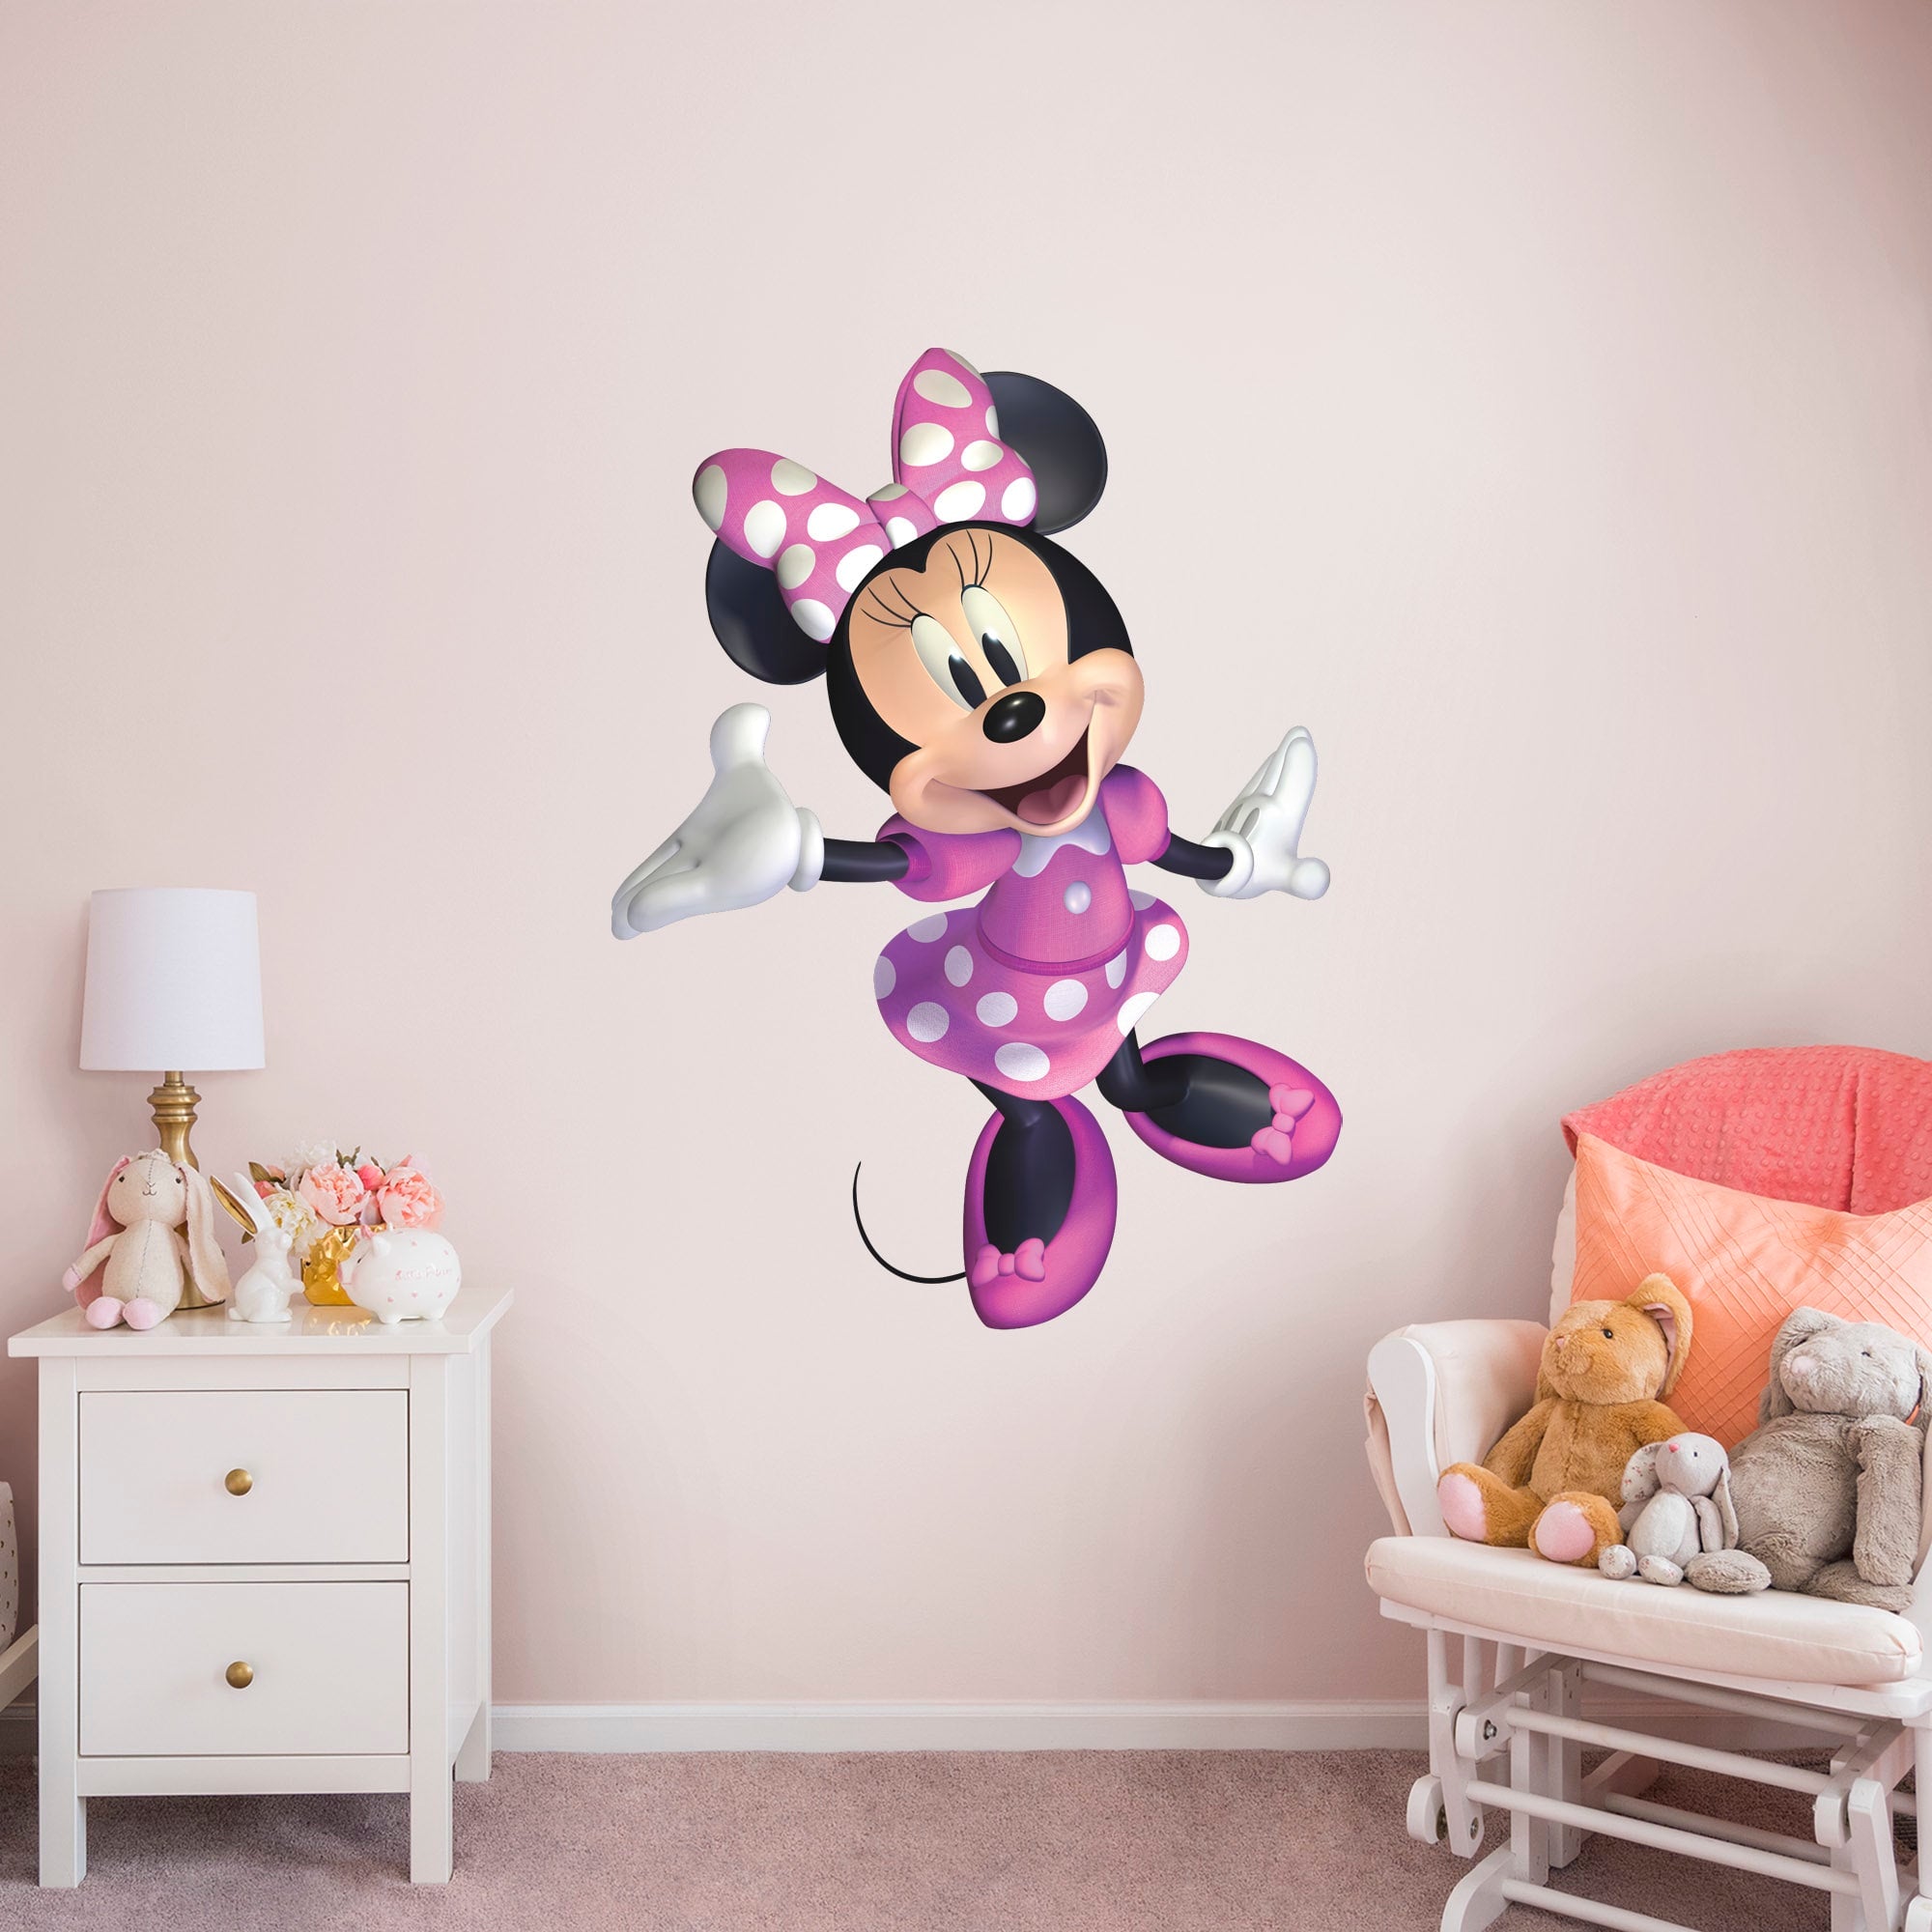 Minnie Mouse - Officially Licensed Disney Removable Wall Decal Giant Character + 2 Decals (38"W x 51"H) by Fathead | Vinyl